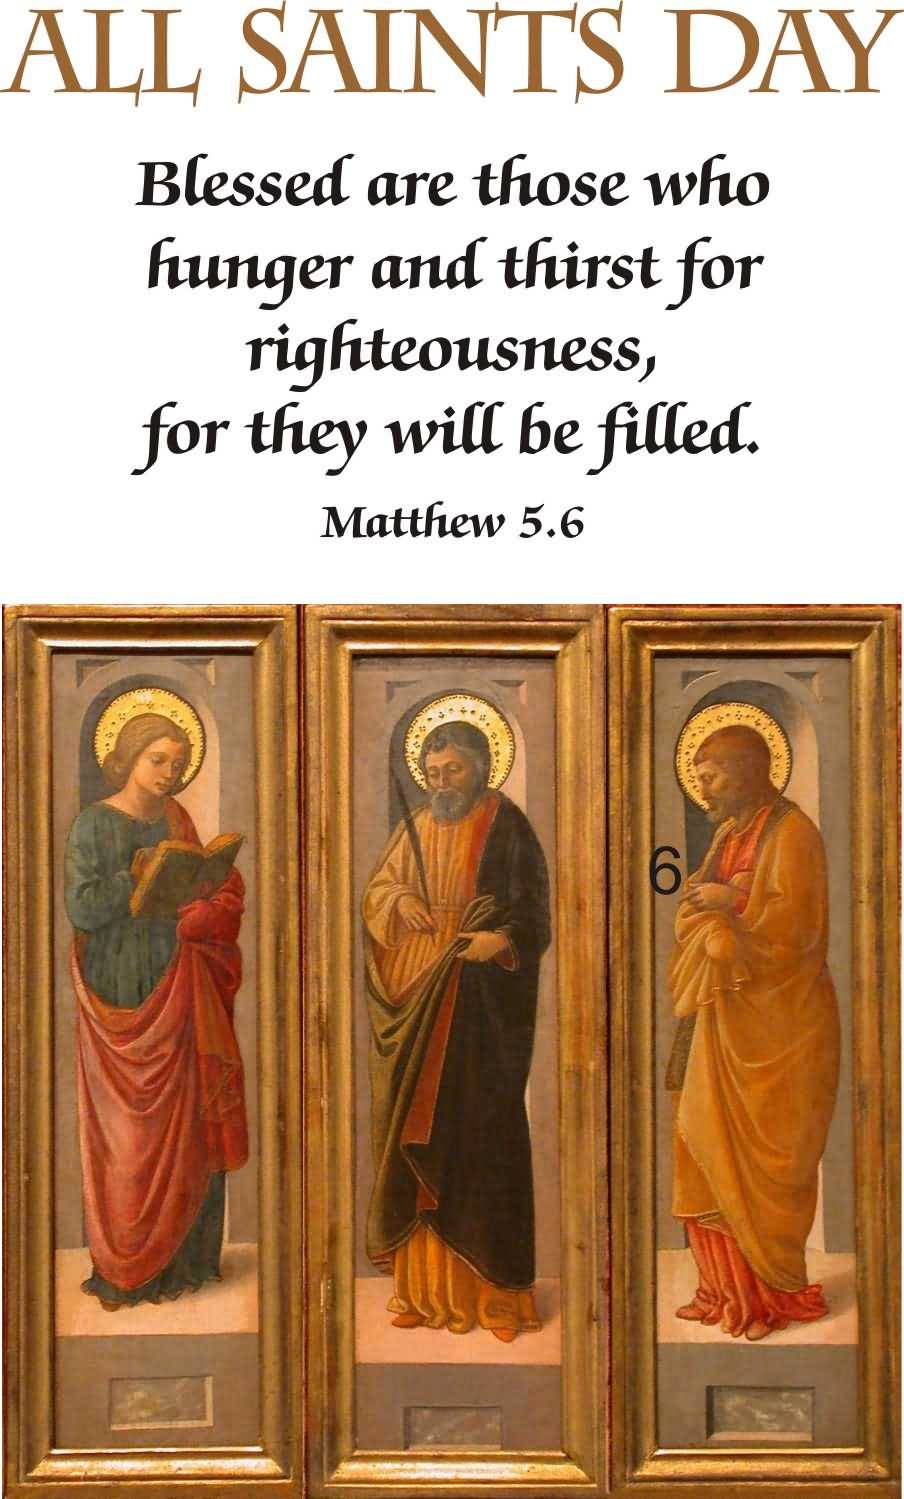 All Saints Day Blessed Are Those Who Hunger And Thirst For Righteousness, For They Will Filled